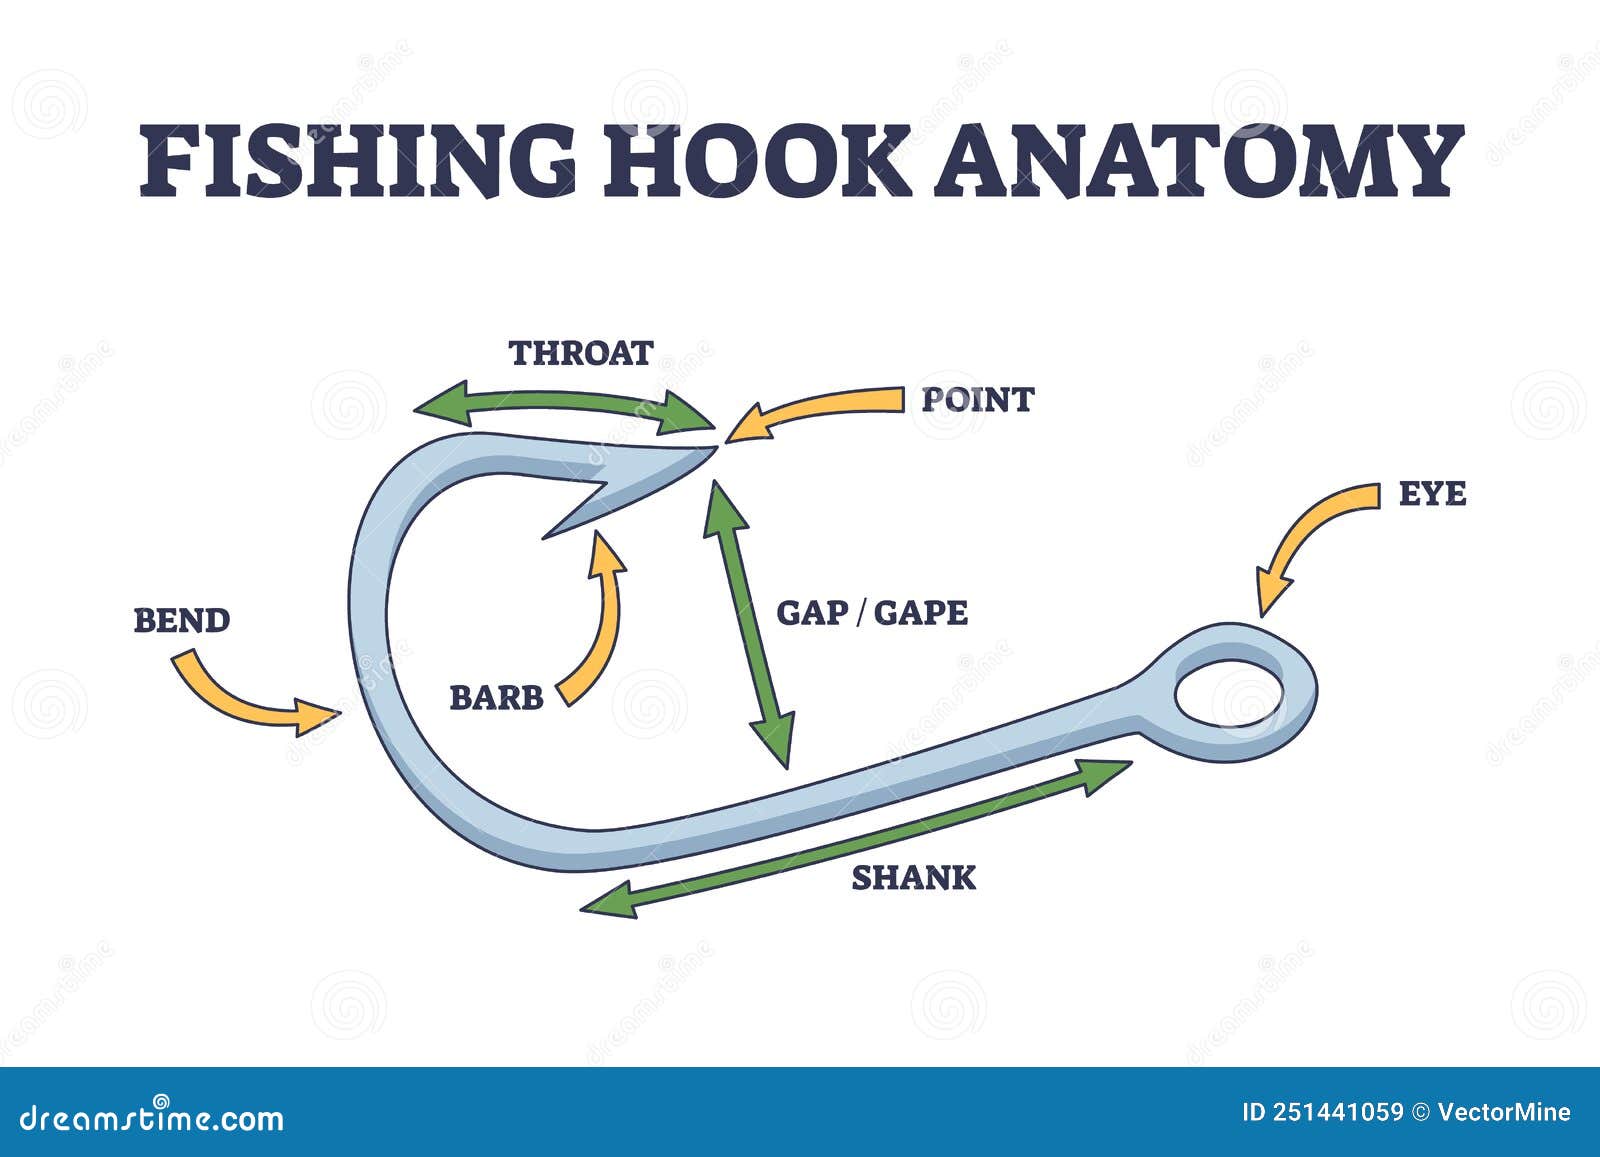 Fishing Hook Anatomy with Fish Catching Elements Description Outline  Diagram Stock Vector - Illustration of hook, trap: 251441059